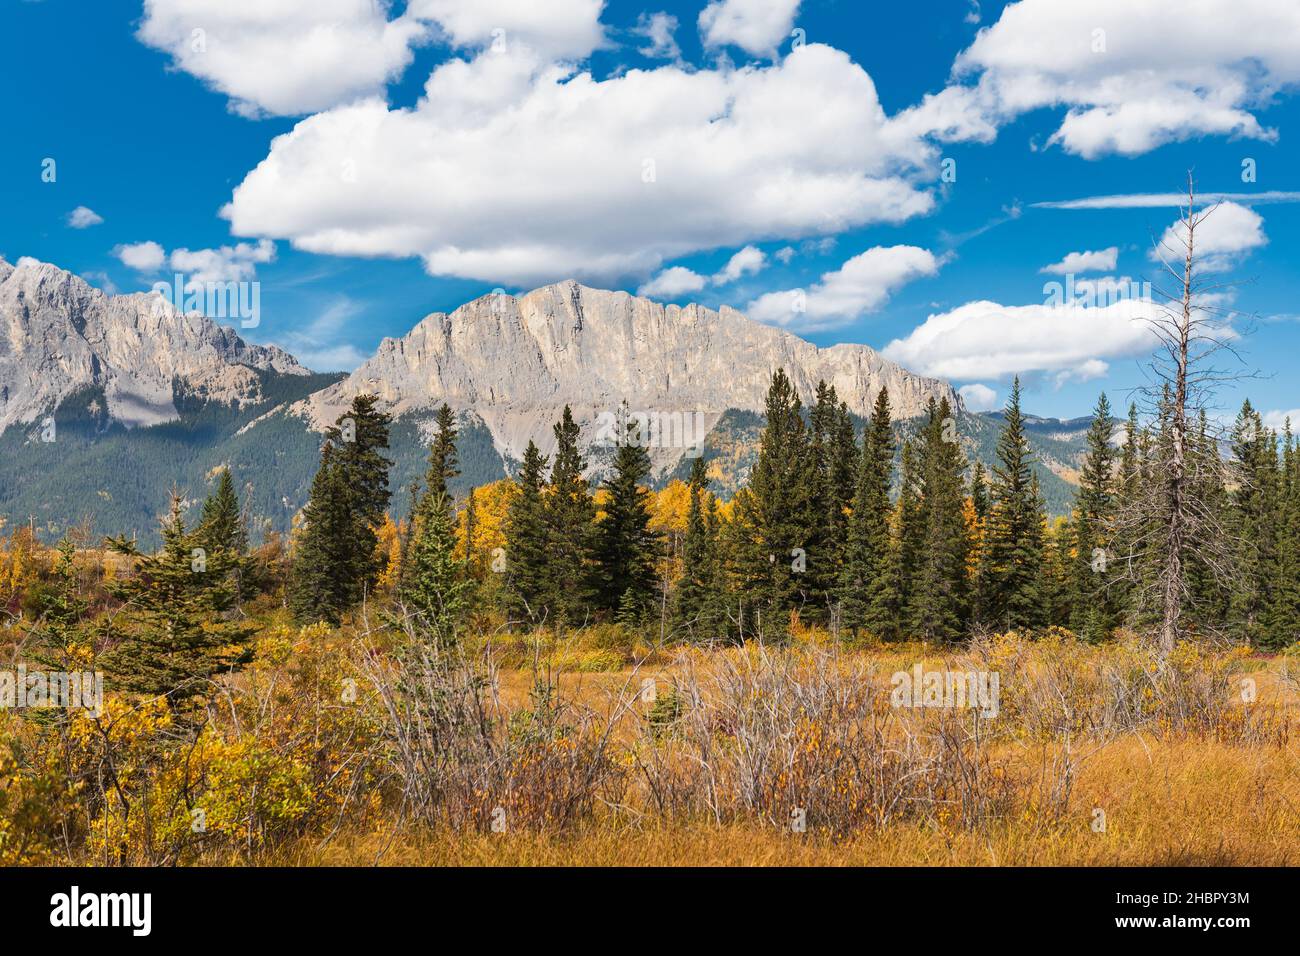 Fall landscapes in the foothills of the canadian rocky mountains Stock Photo